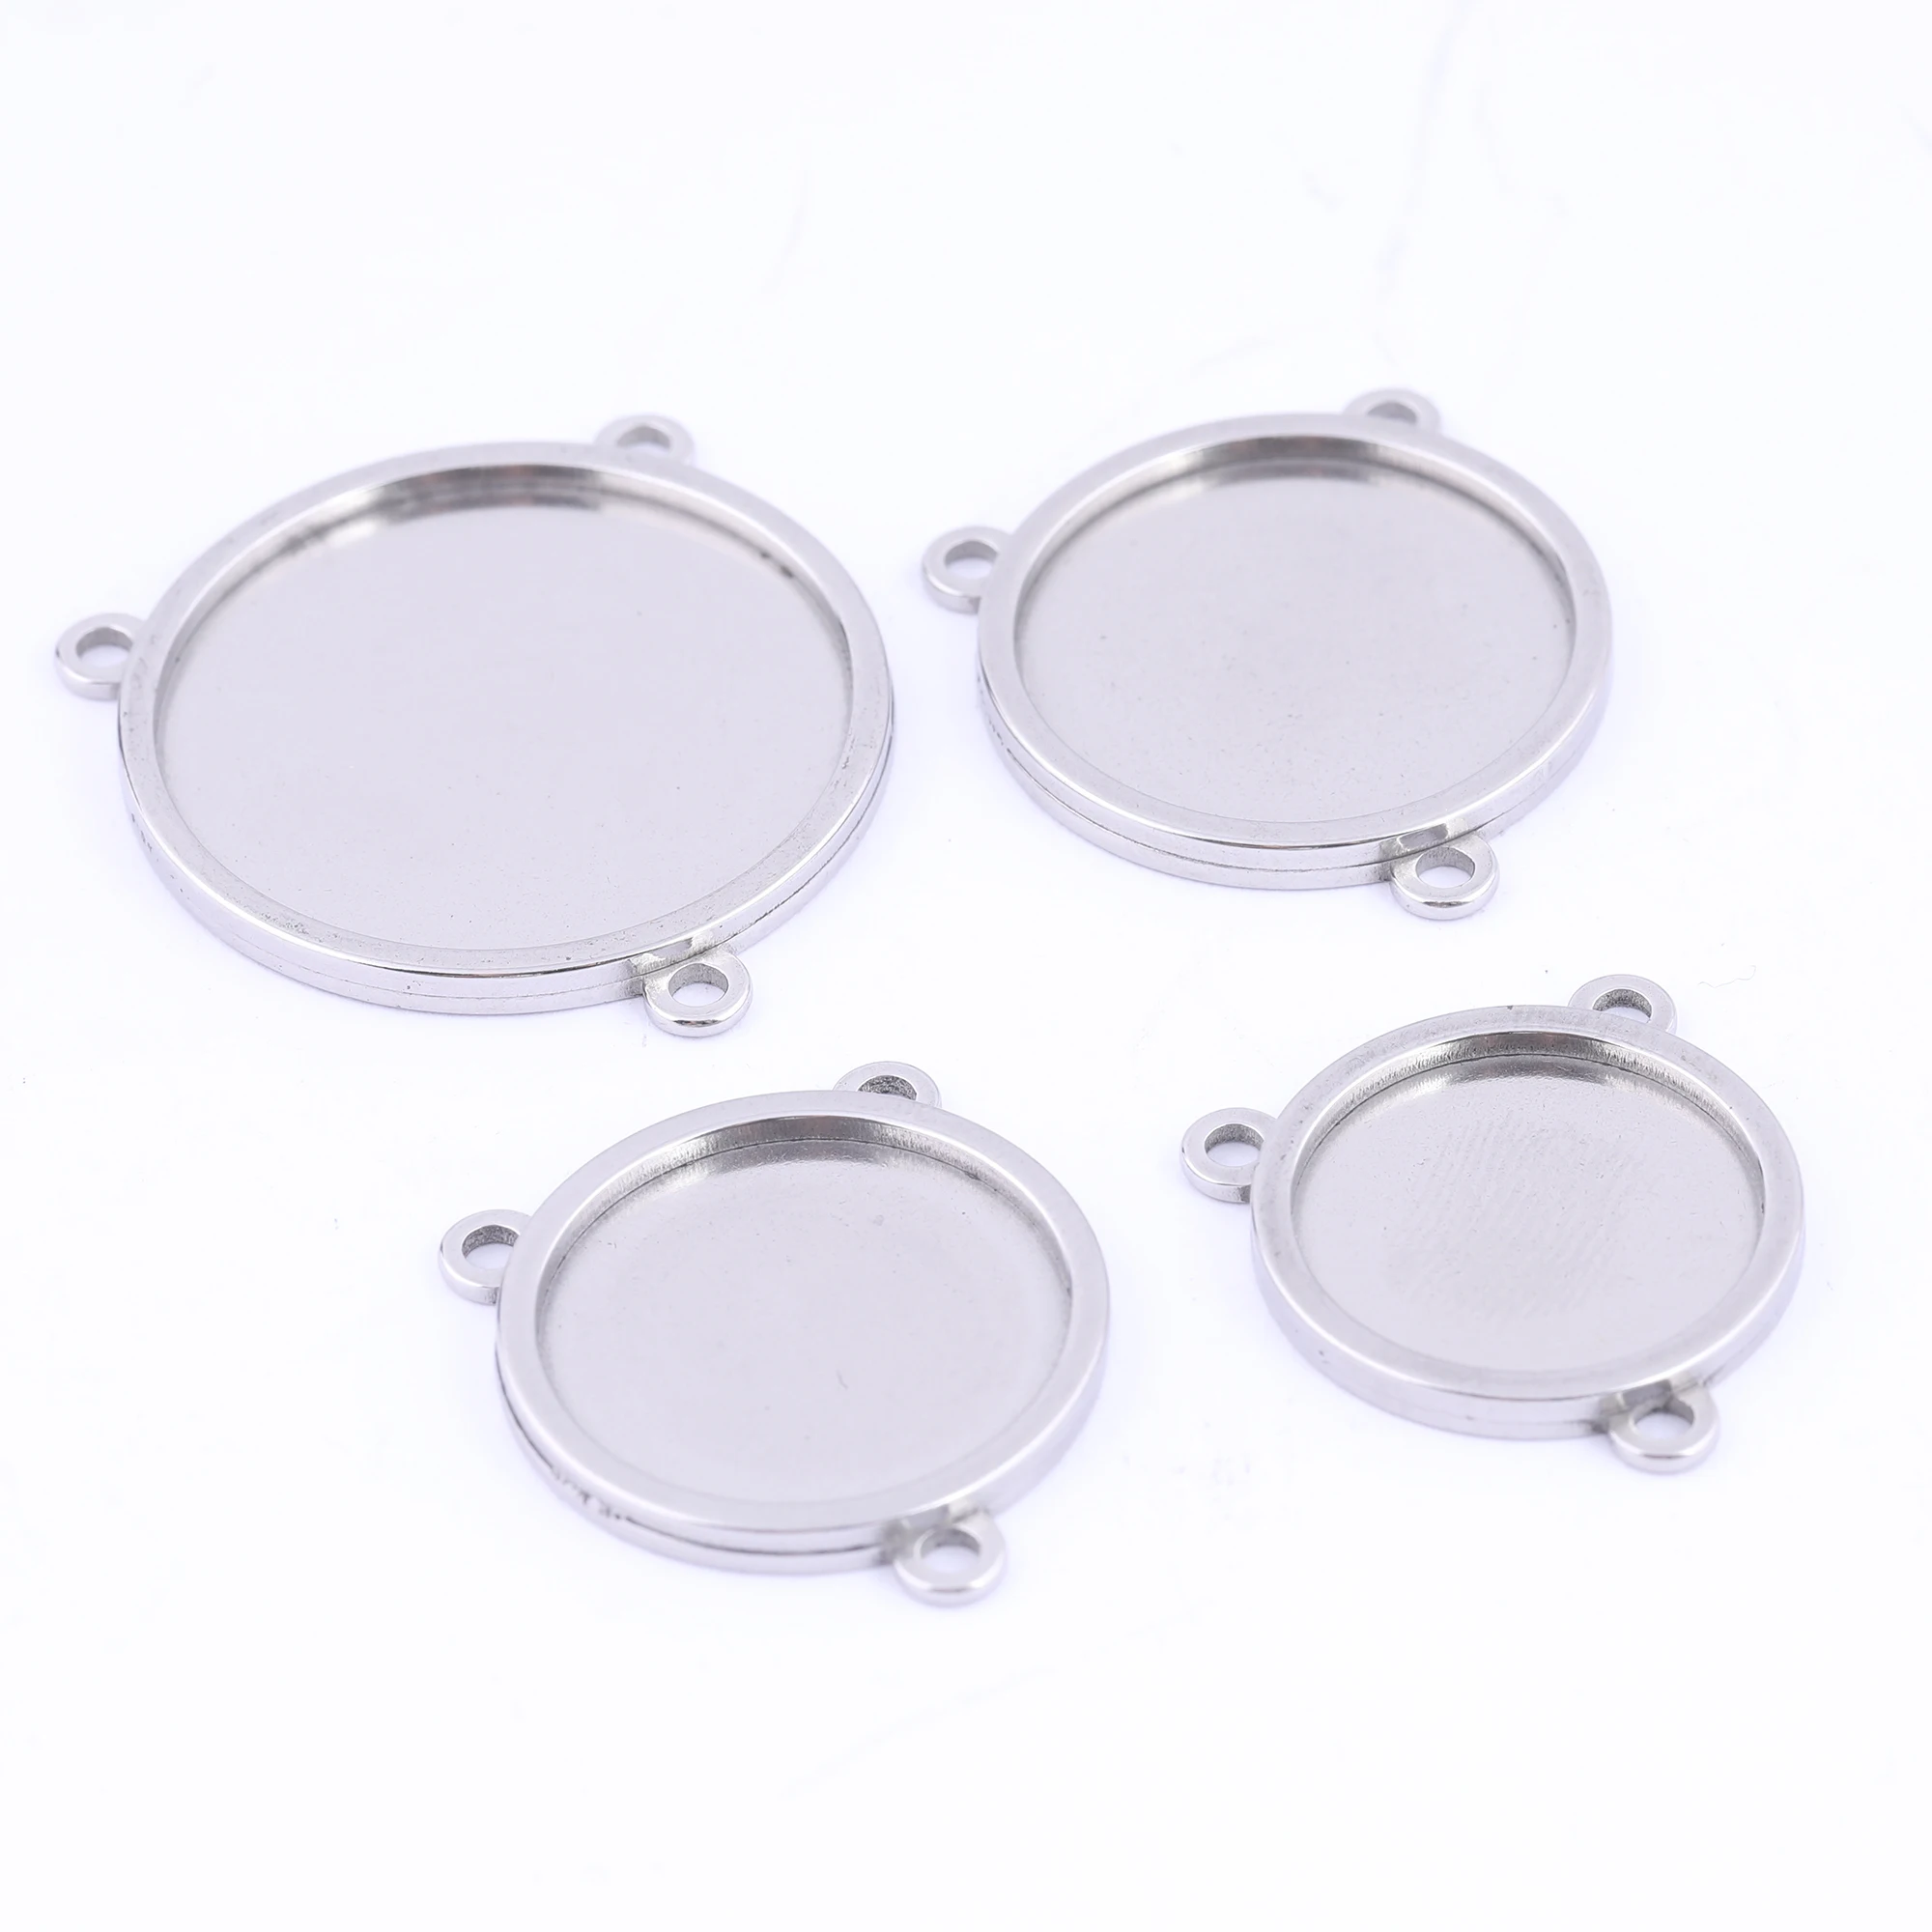 

5pcs Stainless Steel 16mm 18mm 20mm 25mm Cabochon Base Settings Diy Bezel Pendant Blanks With Three Loops For Necklace Making